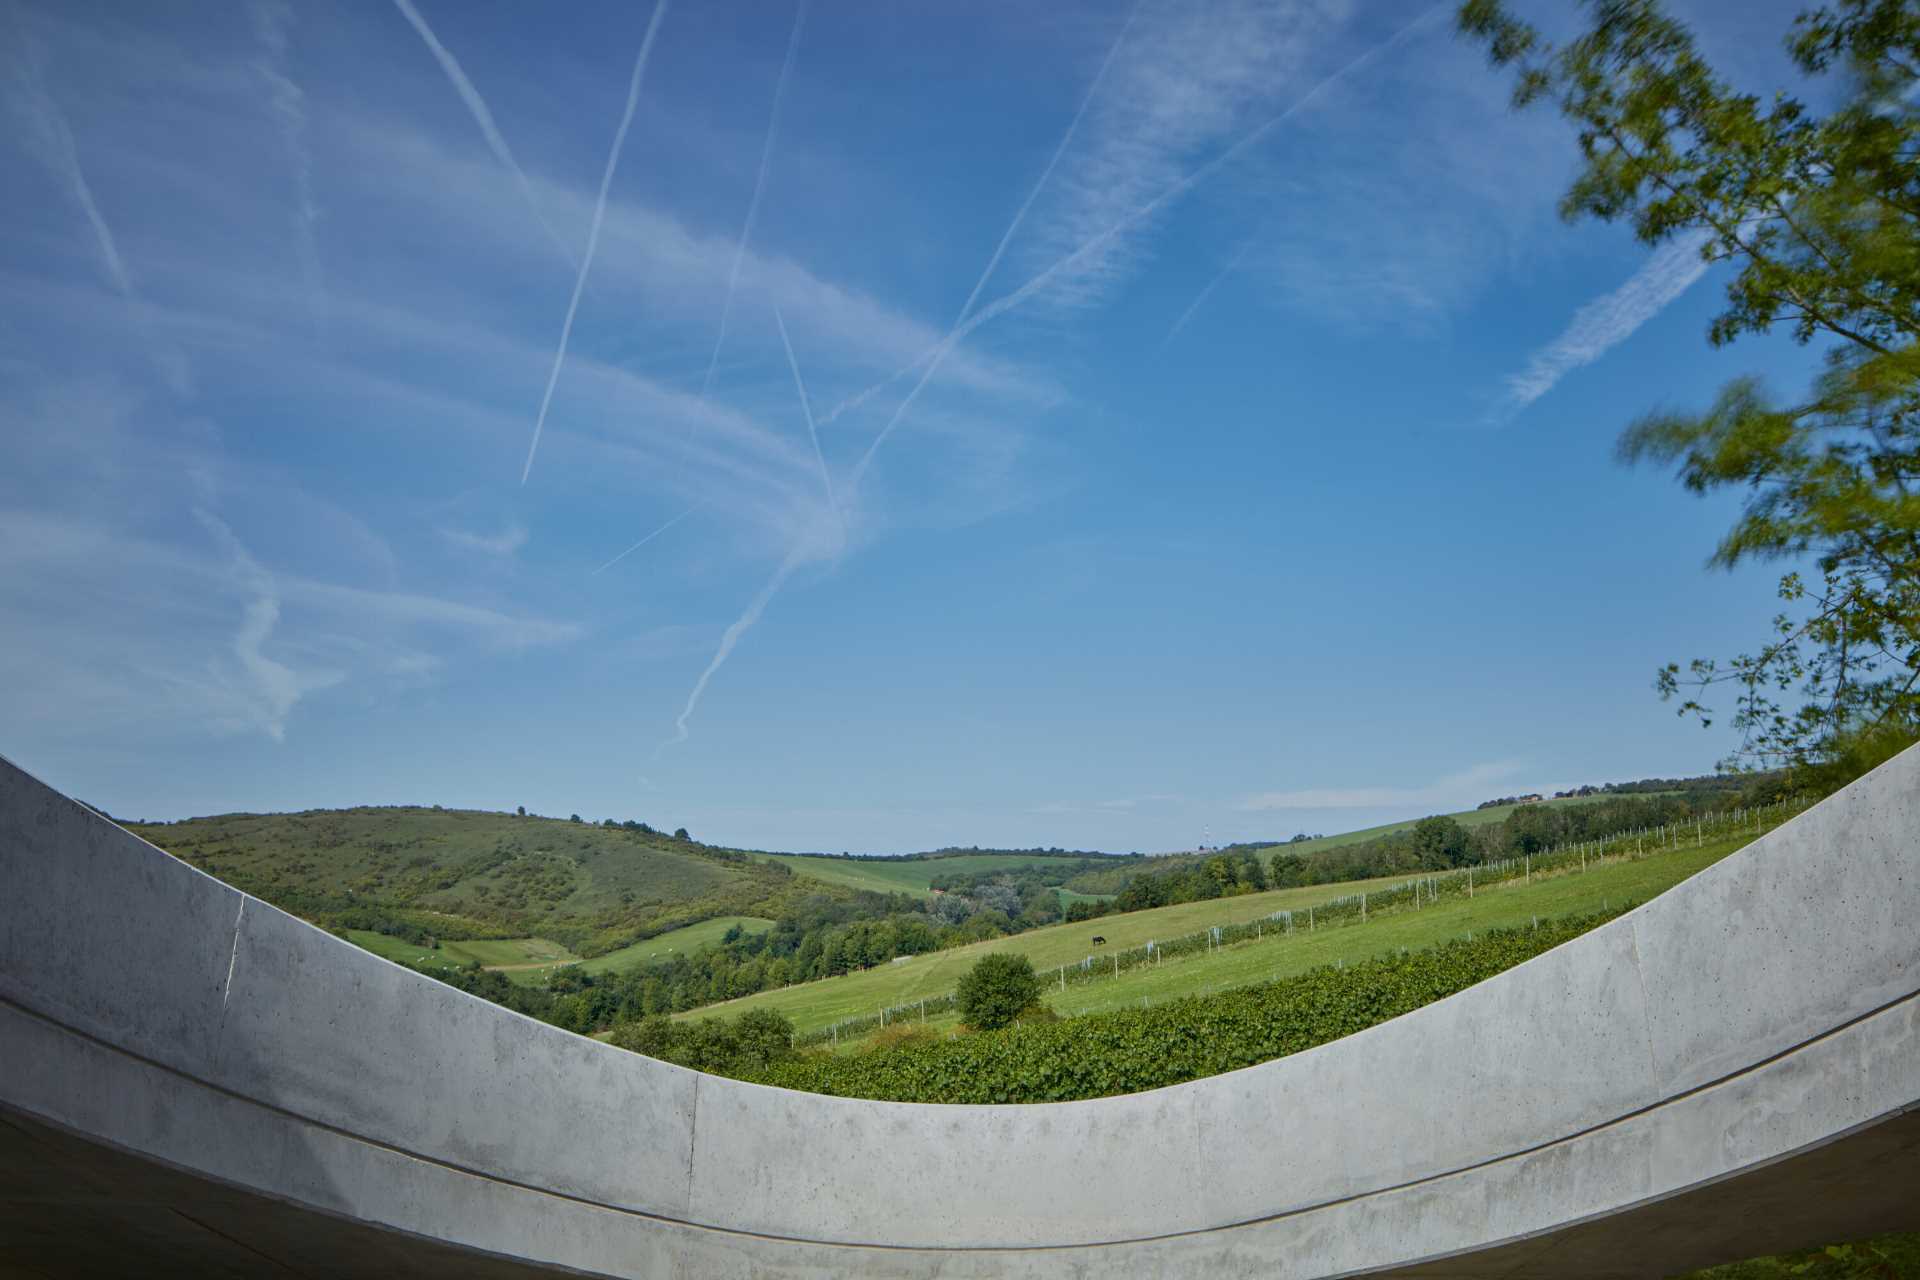 A modern winery that uses exposed concrete, glass, metal, oak, and acacia wood to support the organic form of the building.